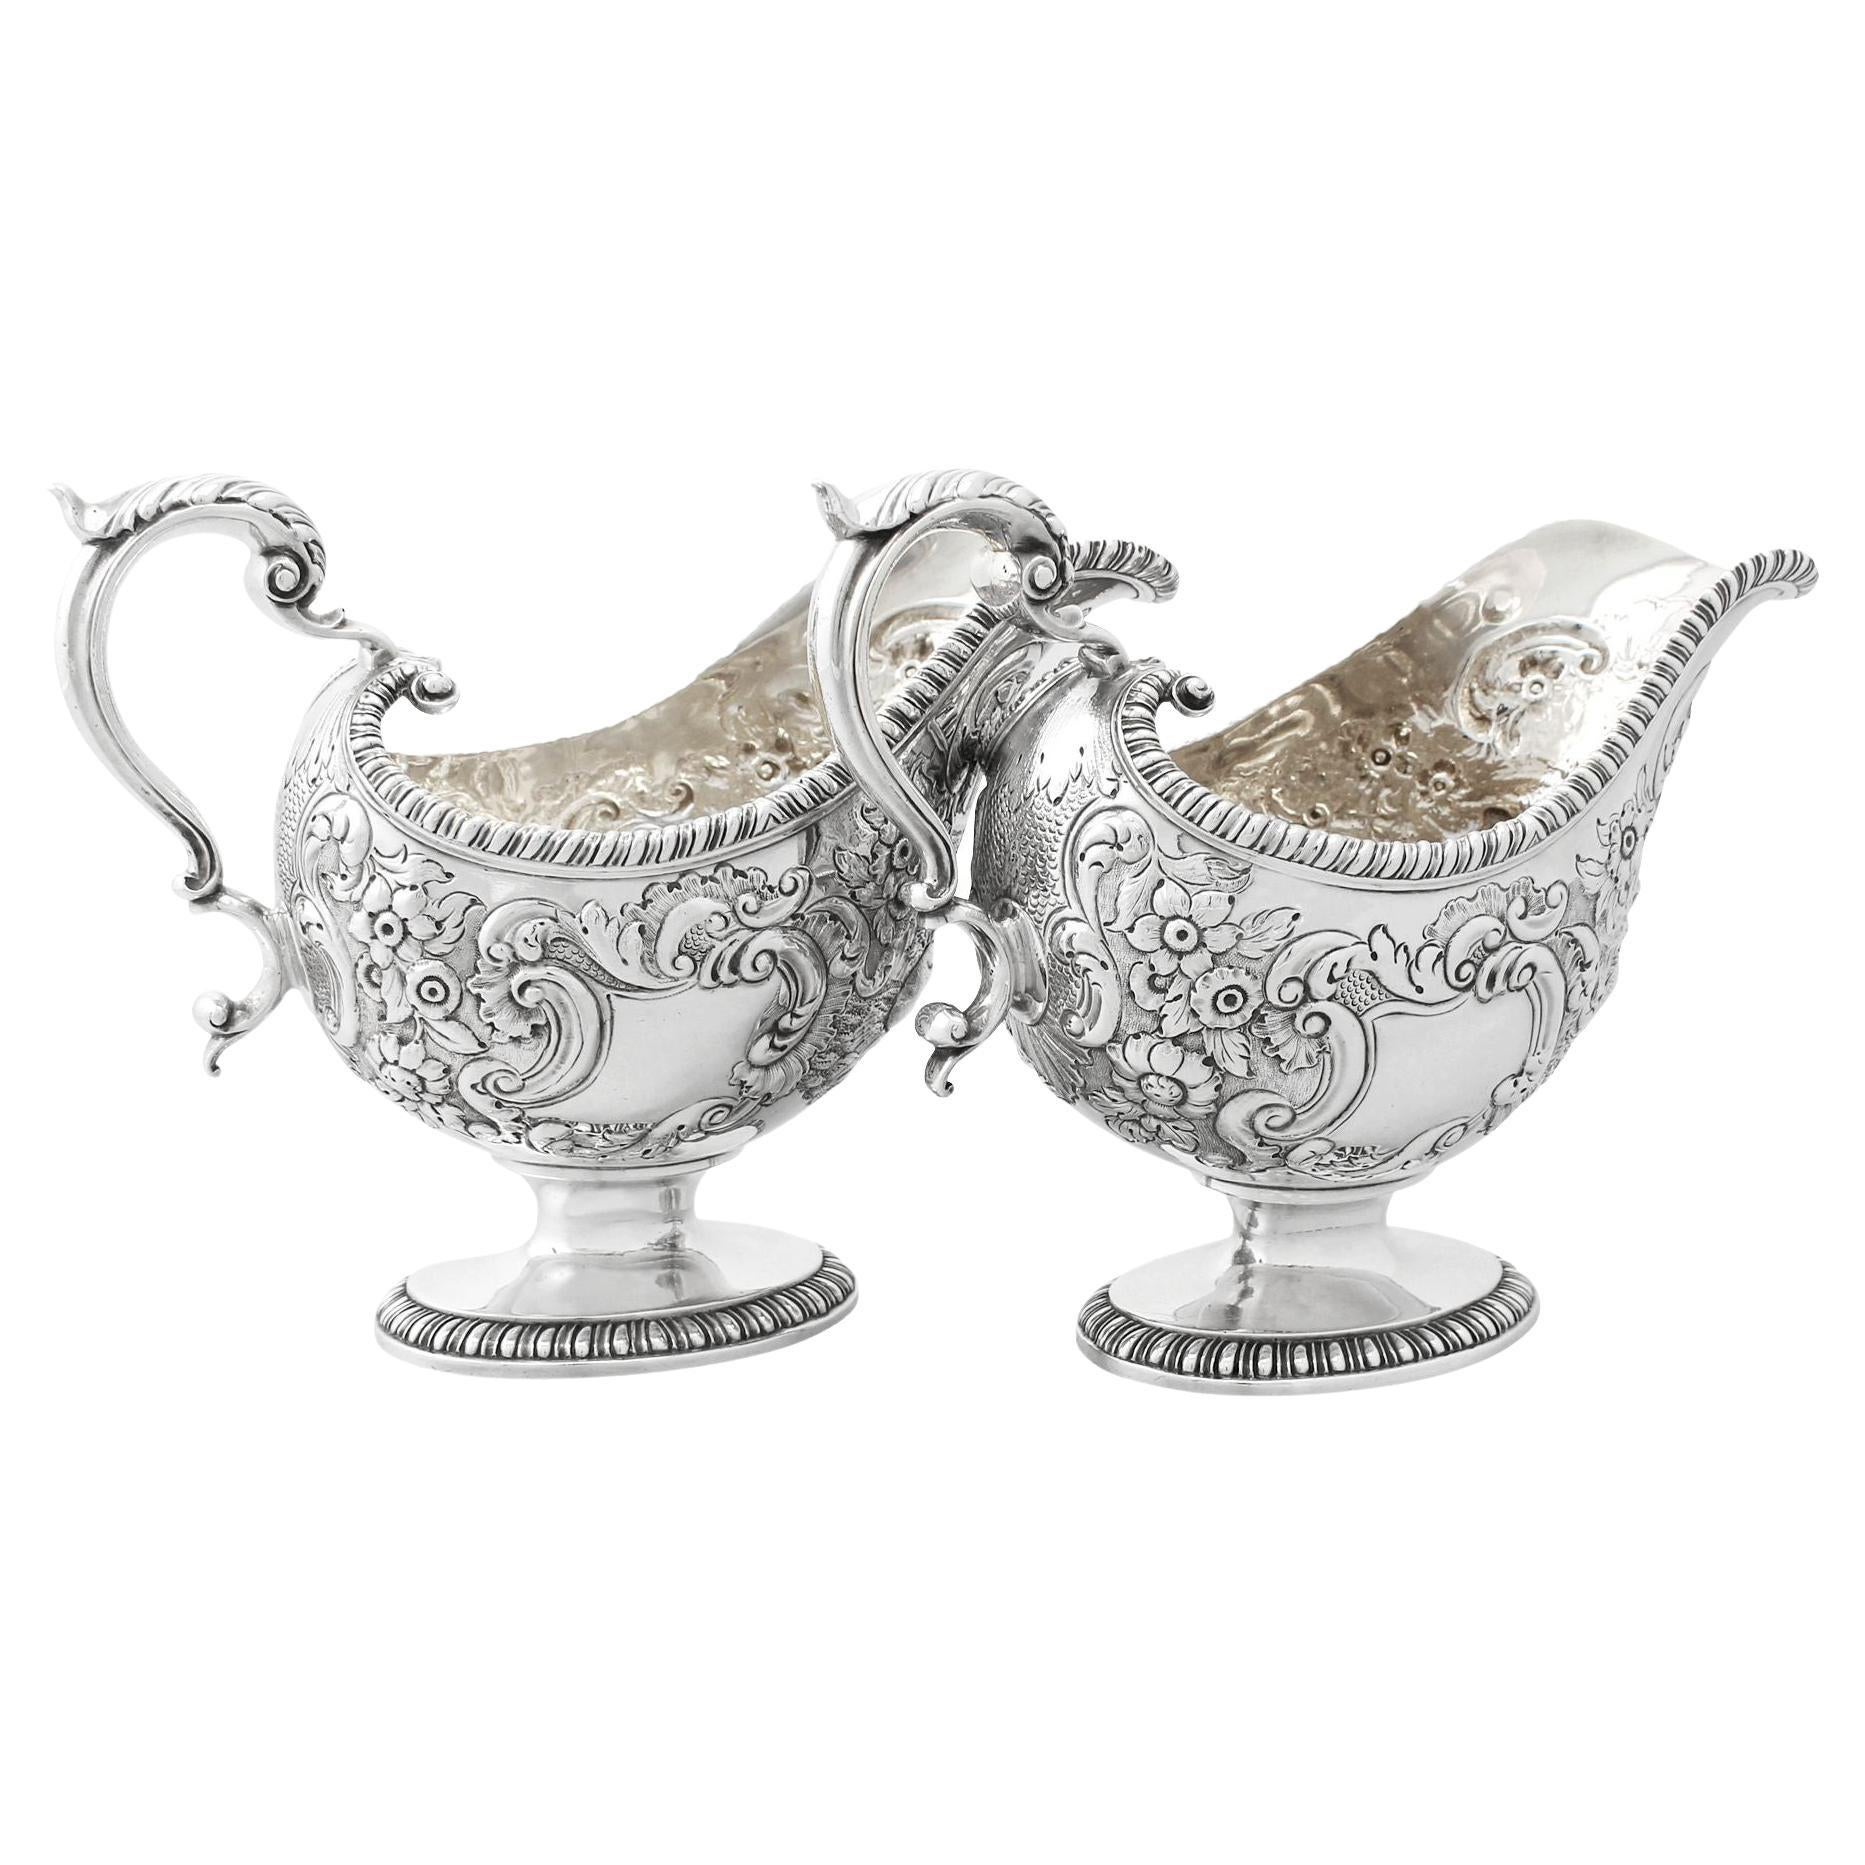 John Swift 1765 Antique Georgian English Sterling Silver Sauceboats For Sale